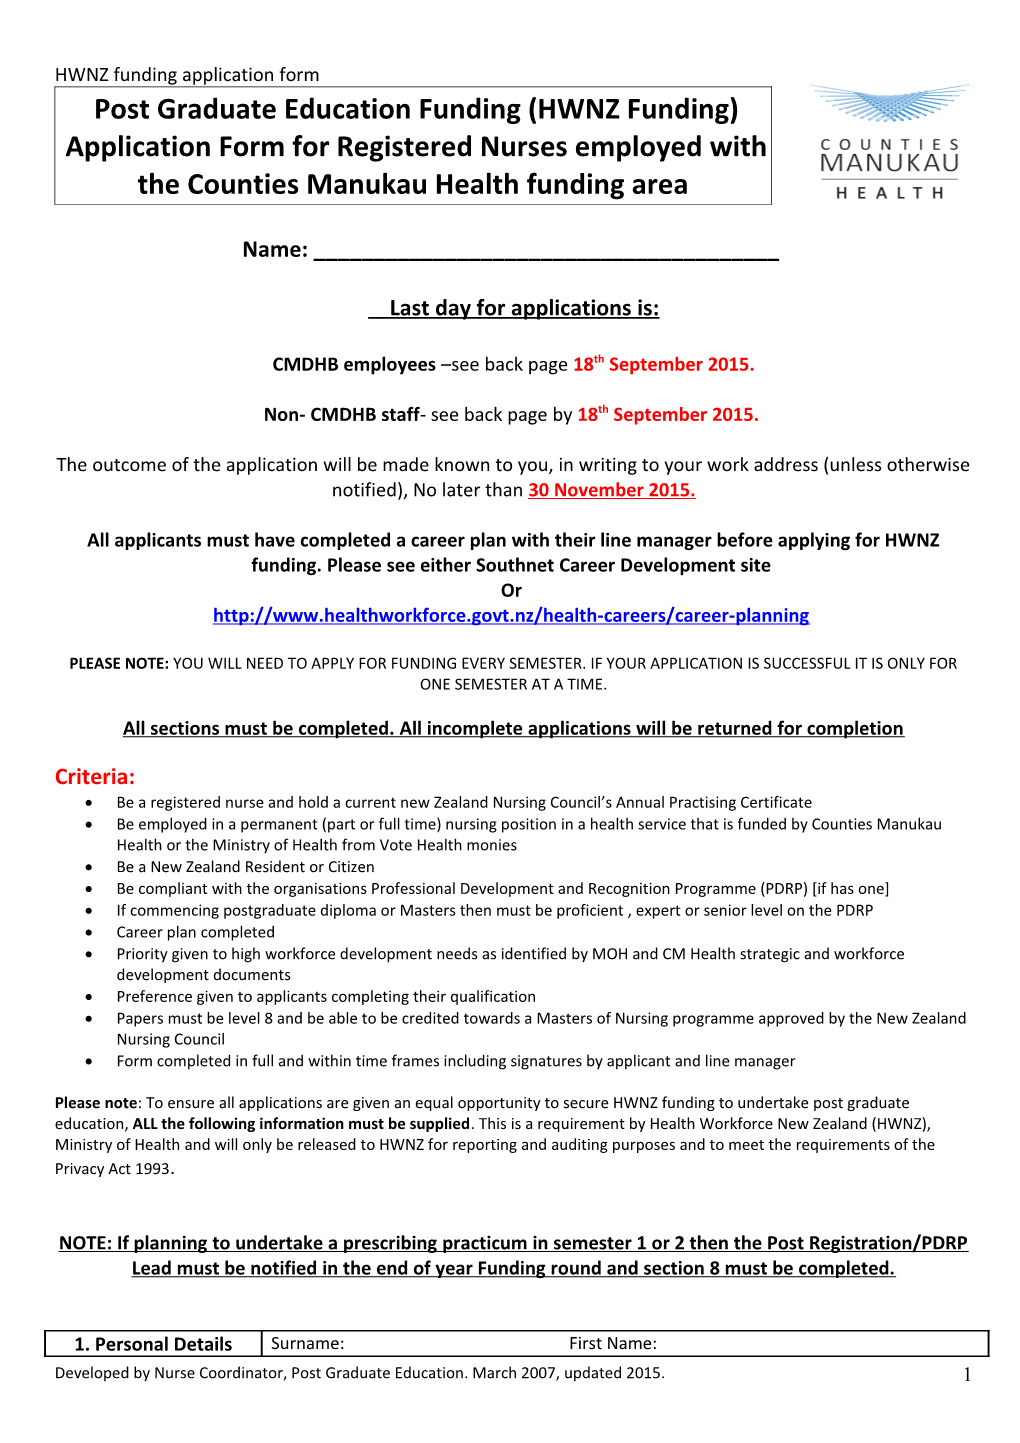 Application Form for Post Graduate Education Funding for Registered Nurses Employed With